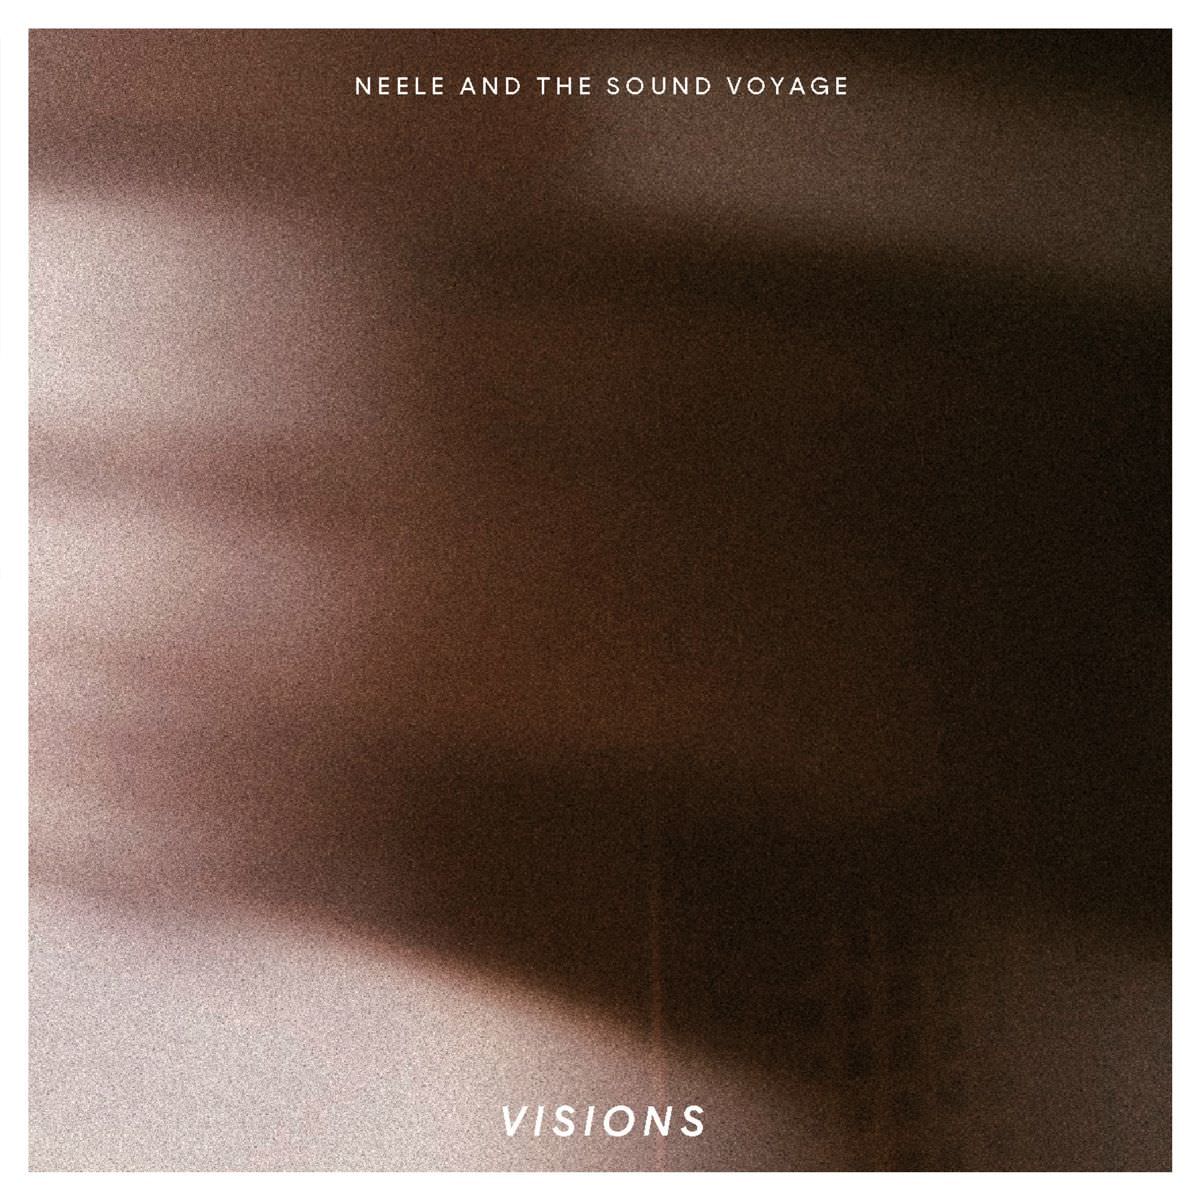 Neele and The Sound Voyage – Visions (2018) [Qobuz FLAC 24bit/44,1kHz]